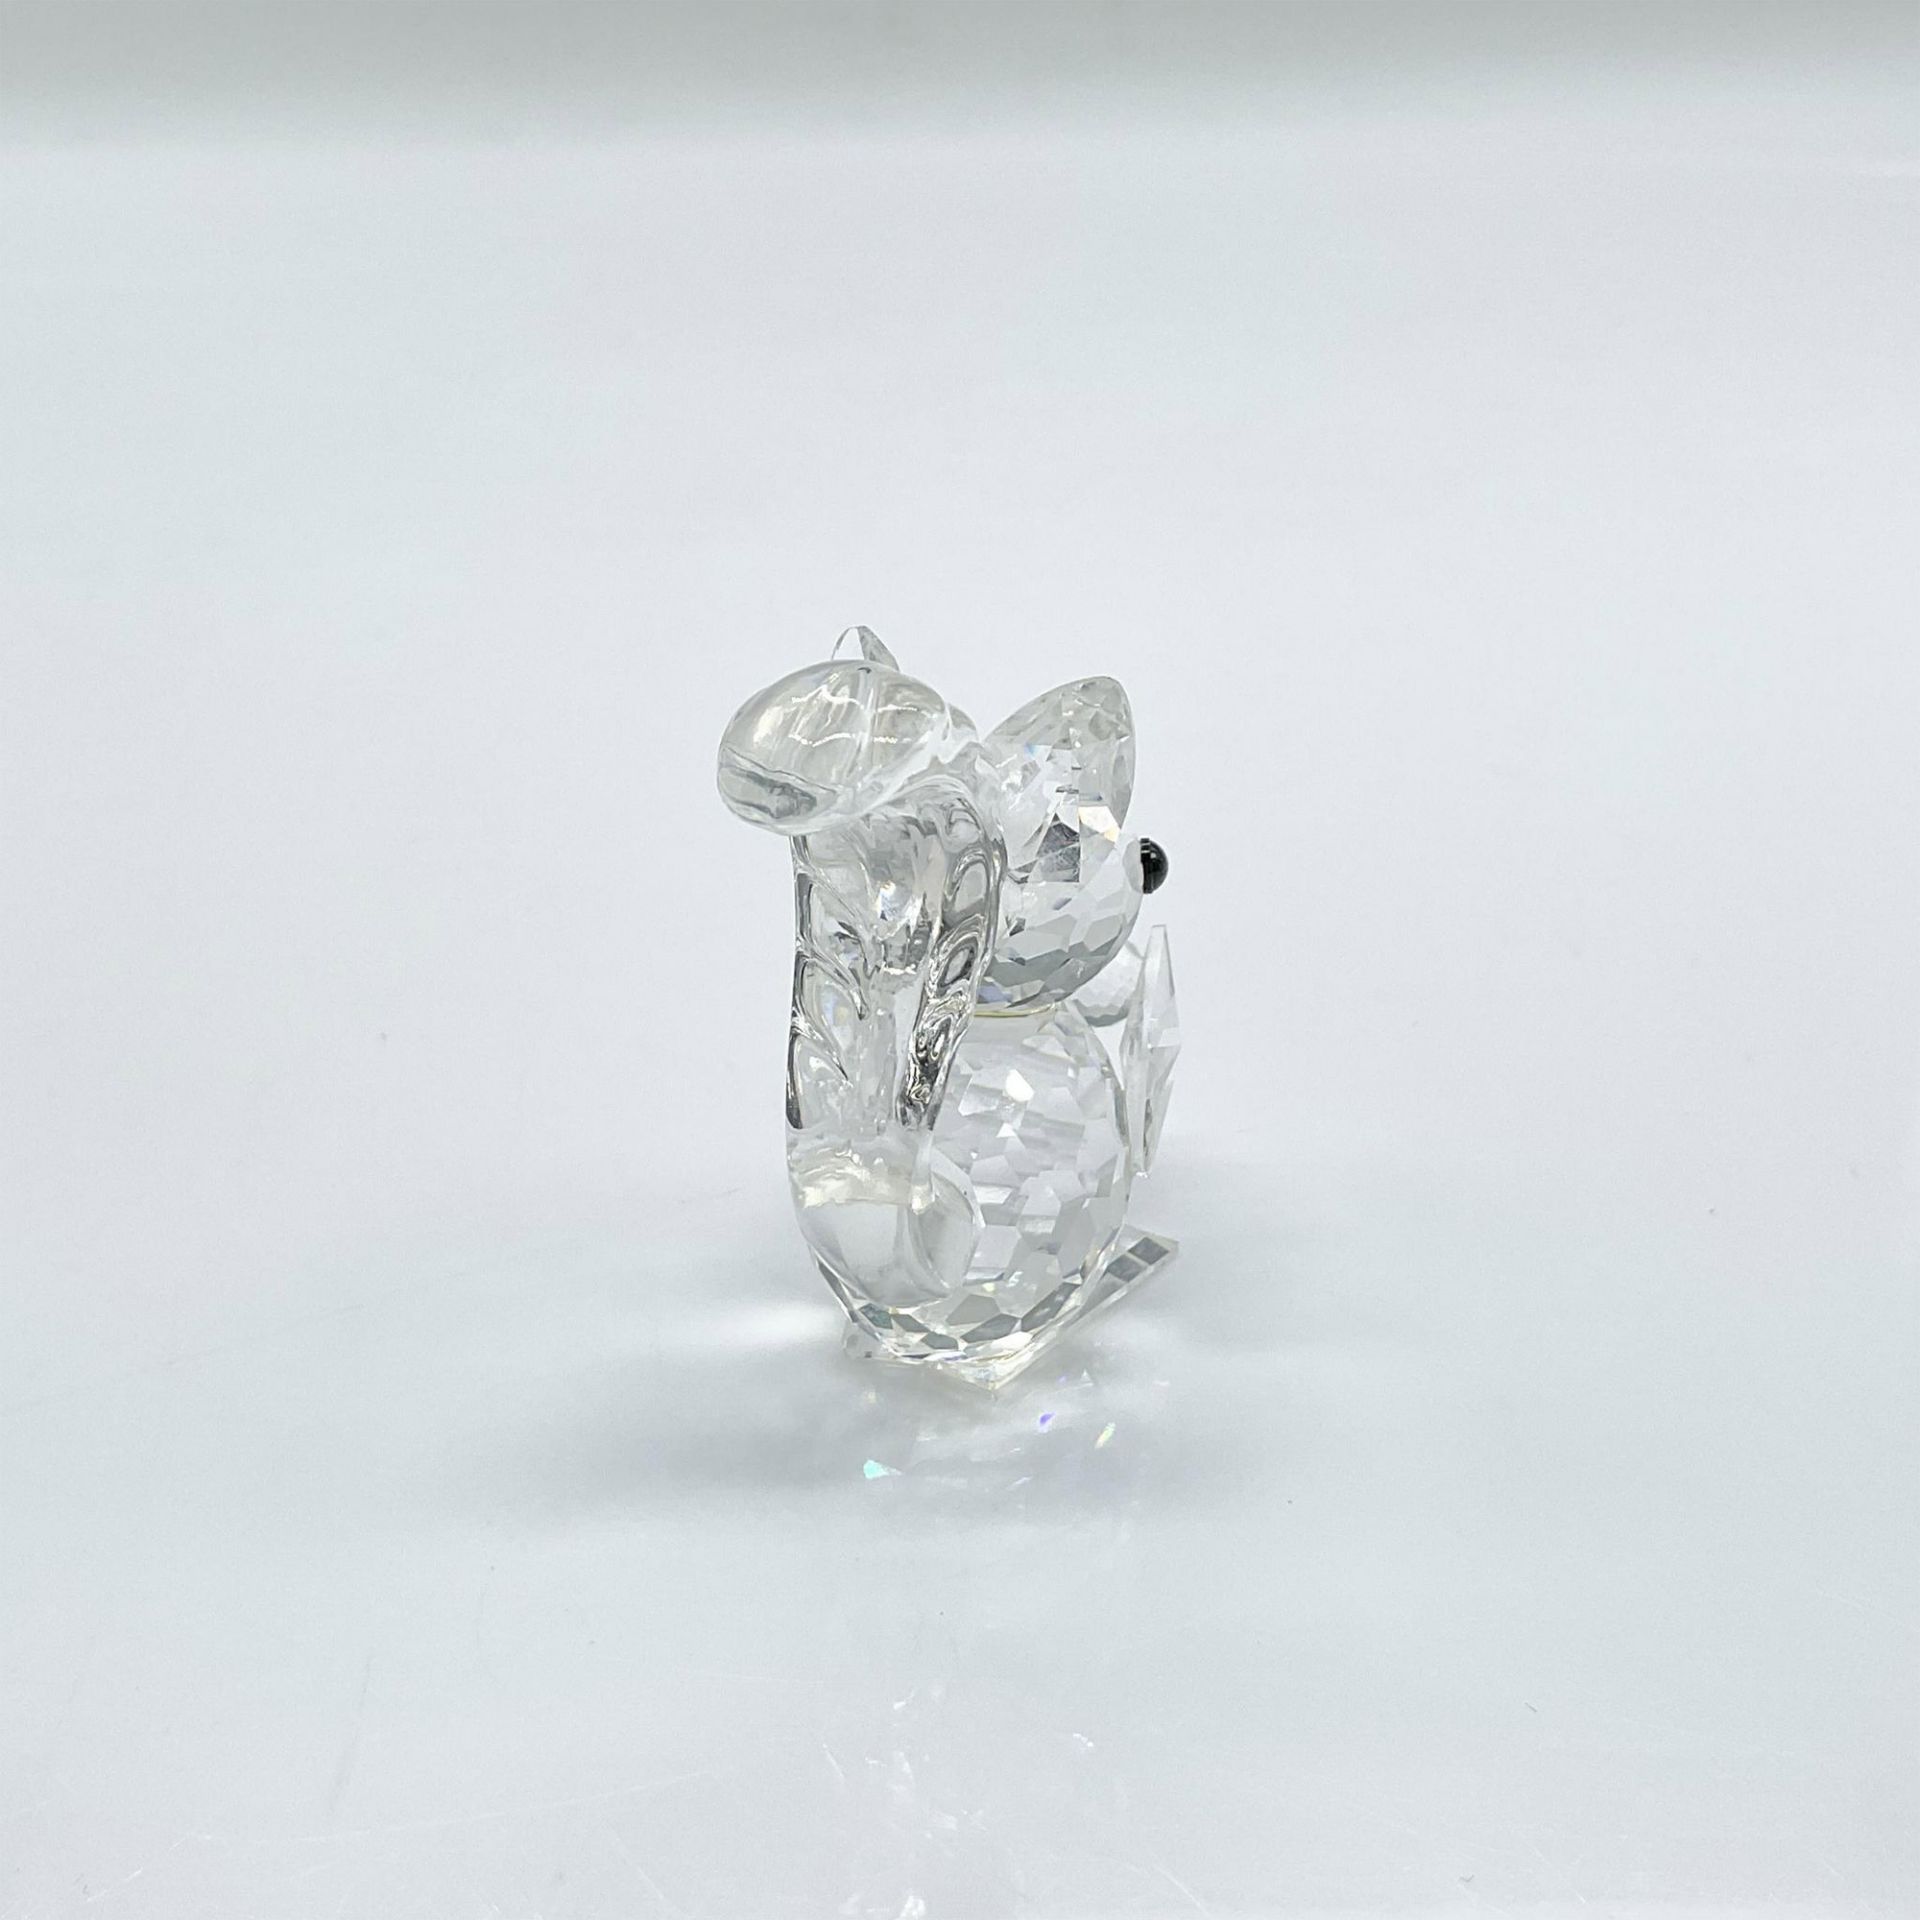 Swarovski Silver Crystal Figurine, Squirrel With Long Ears - Image 3 of 4